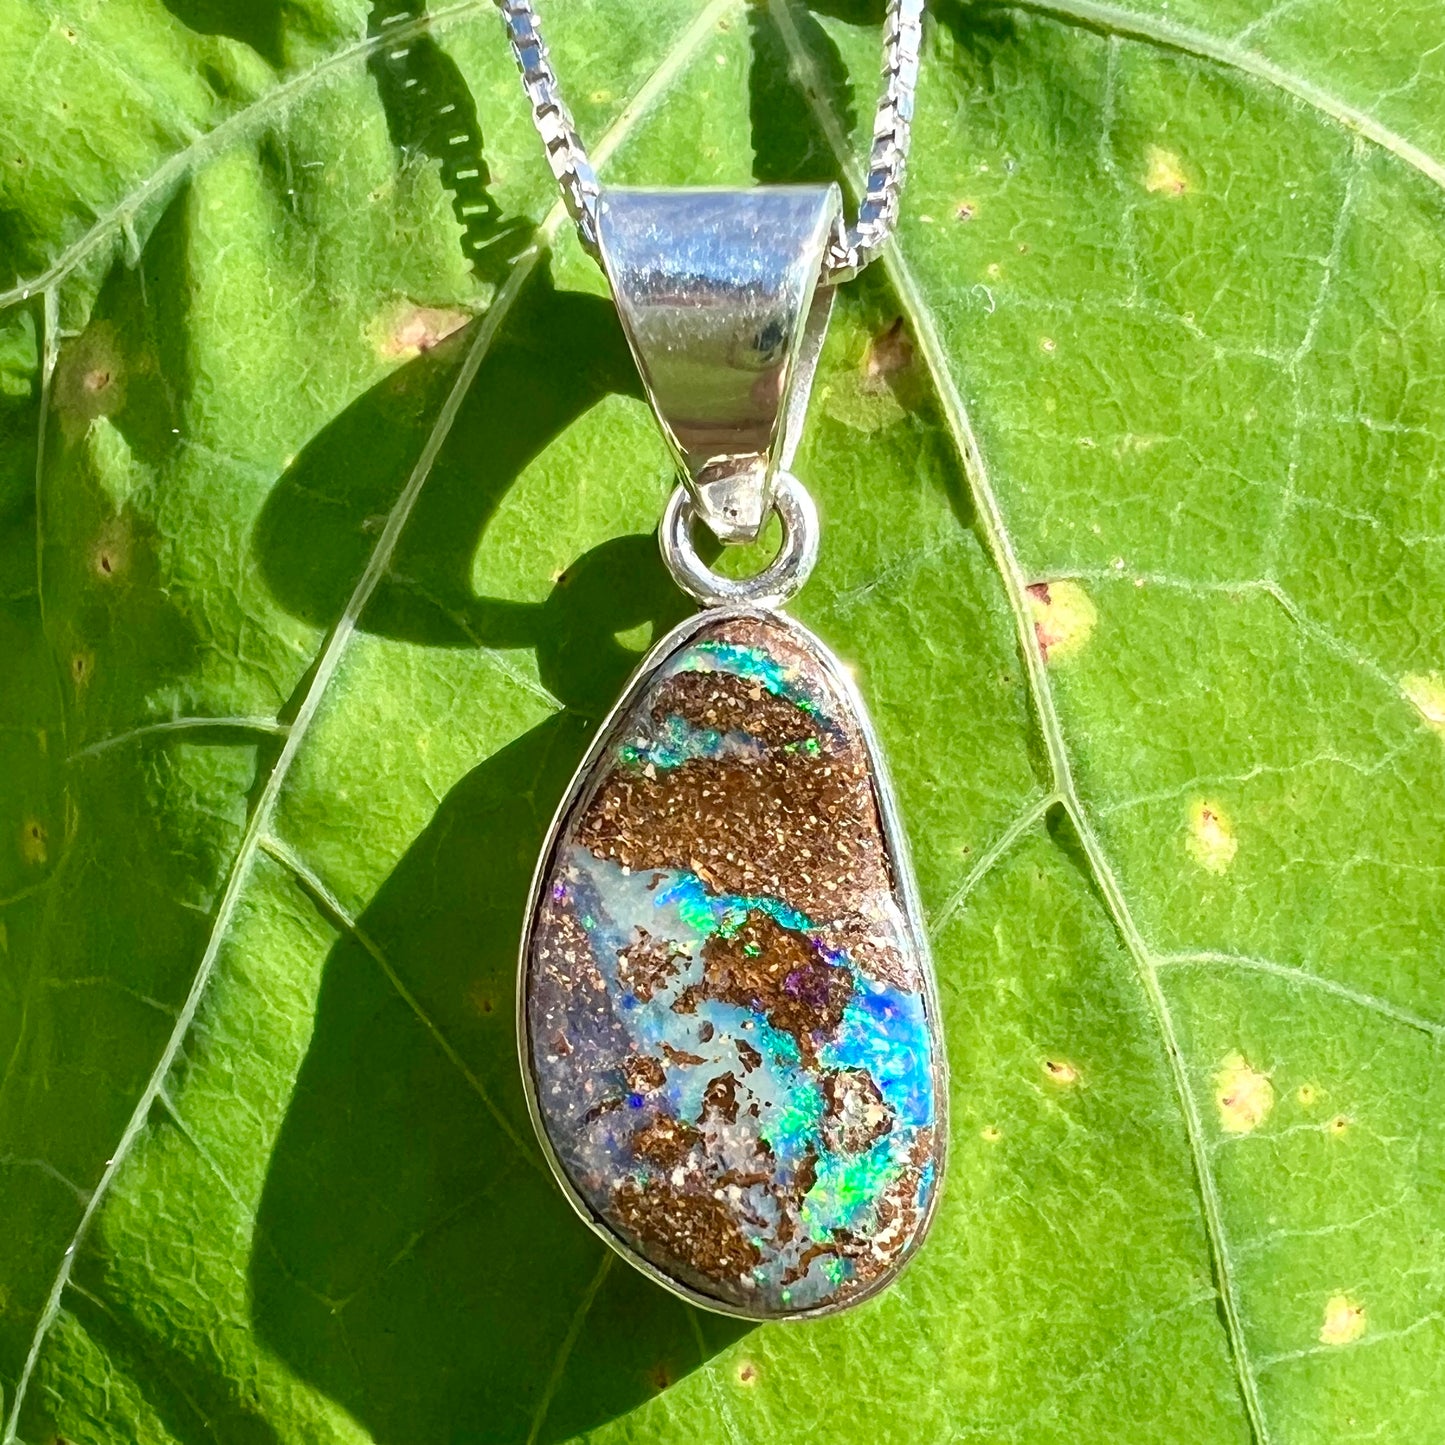 A sterling silver necklace set with a rainbow boulder opal stone.